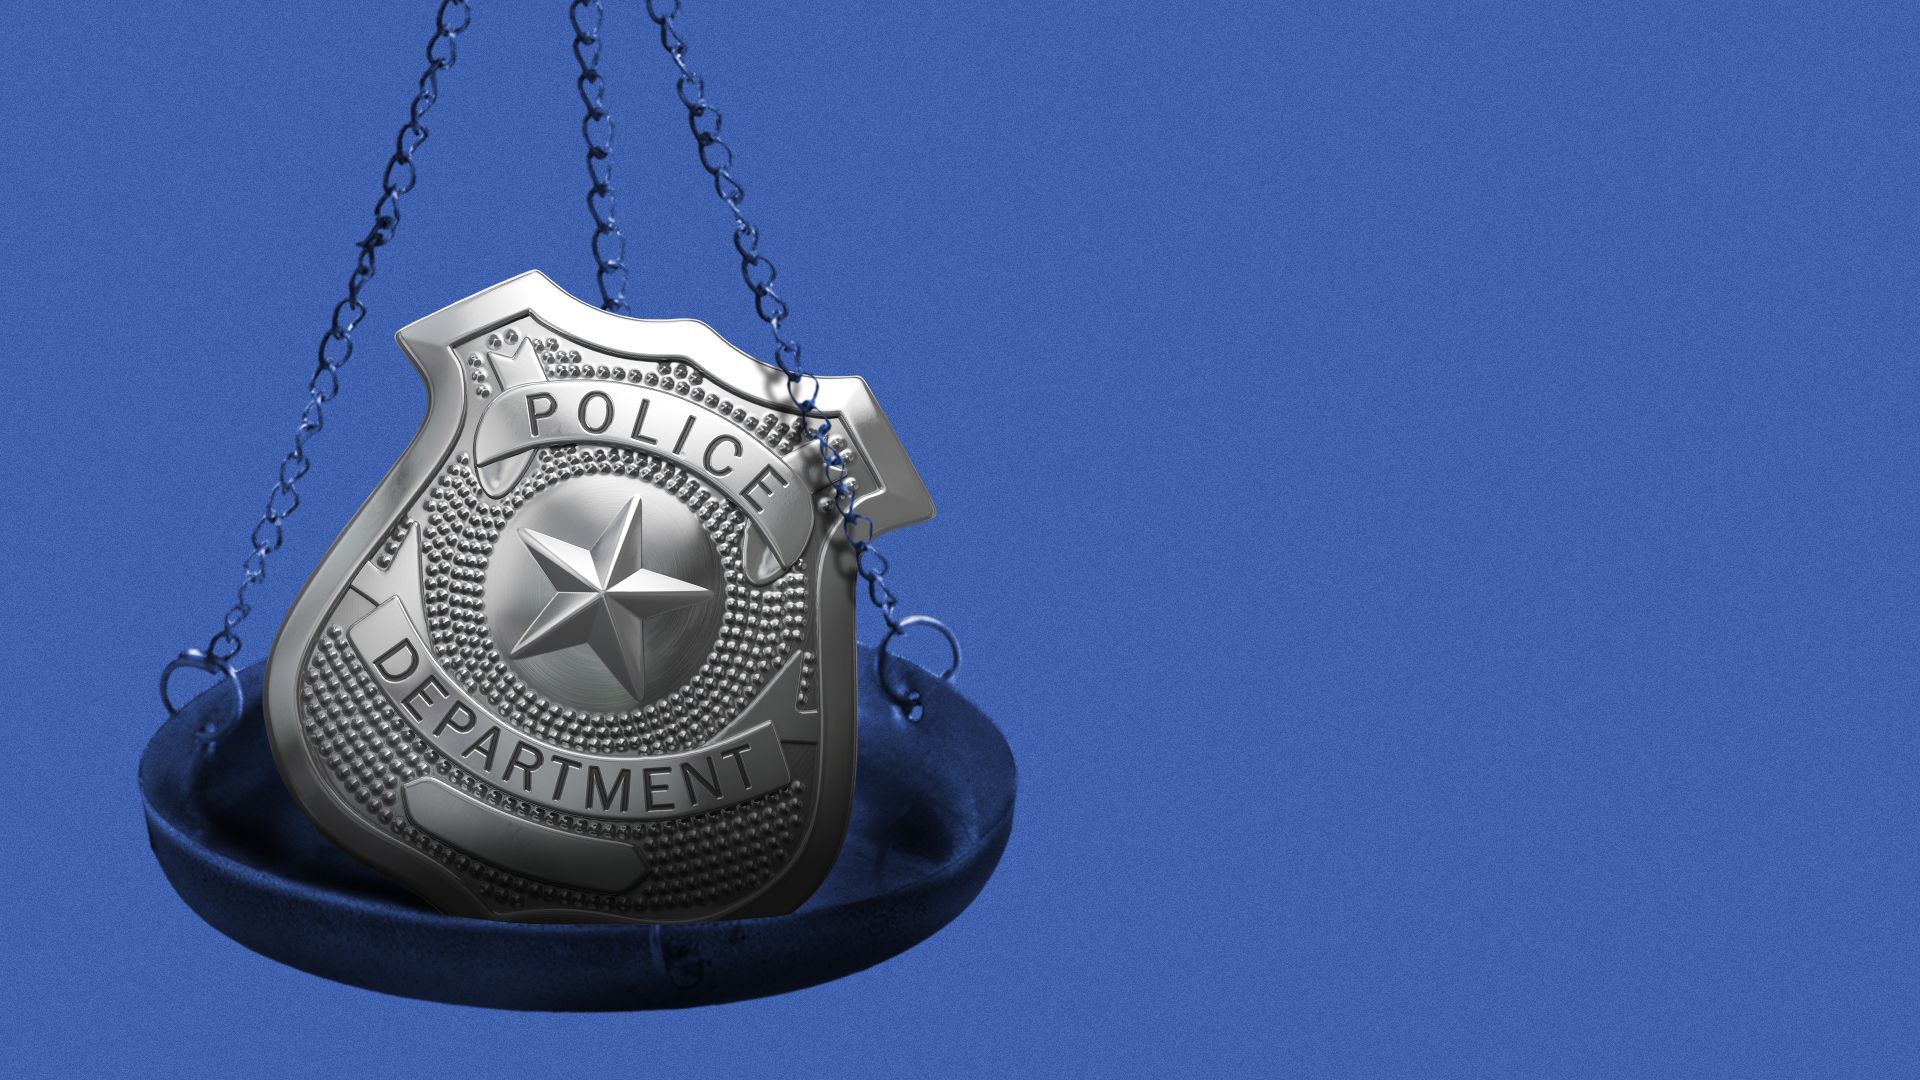 Illustration of a police badge in the tray of the scales of justice.